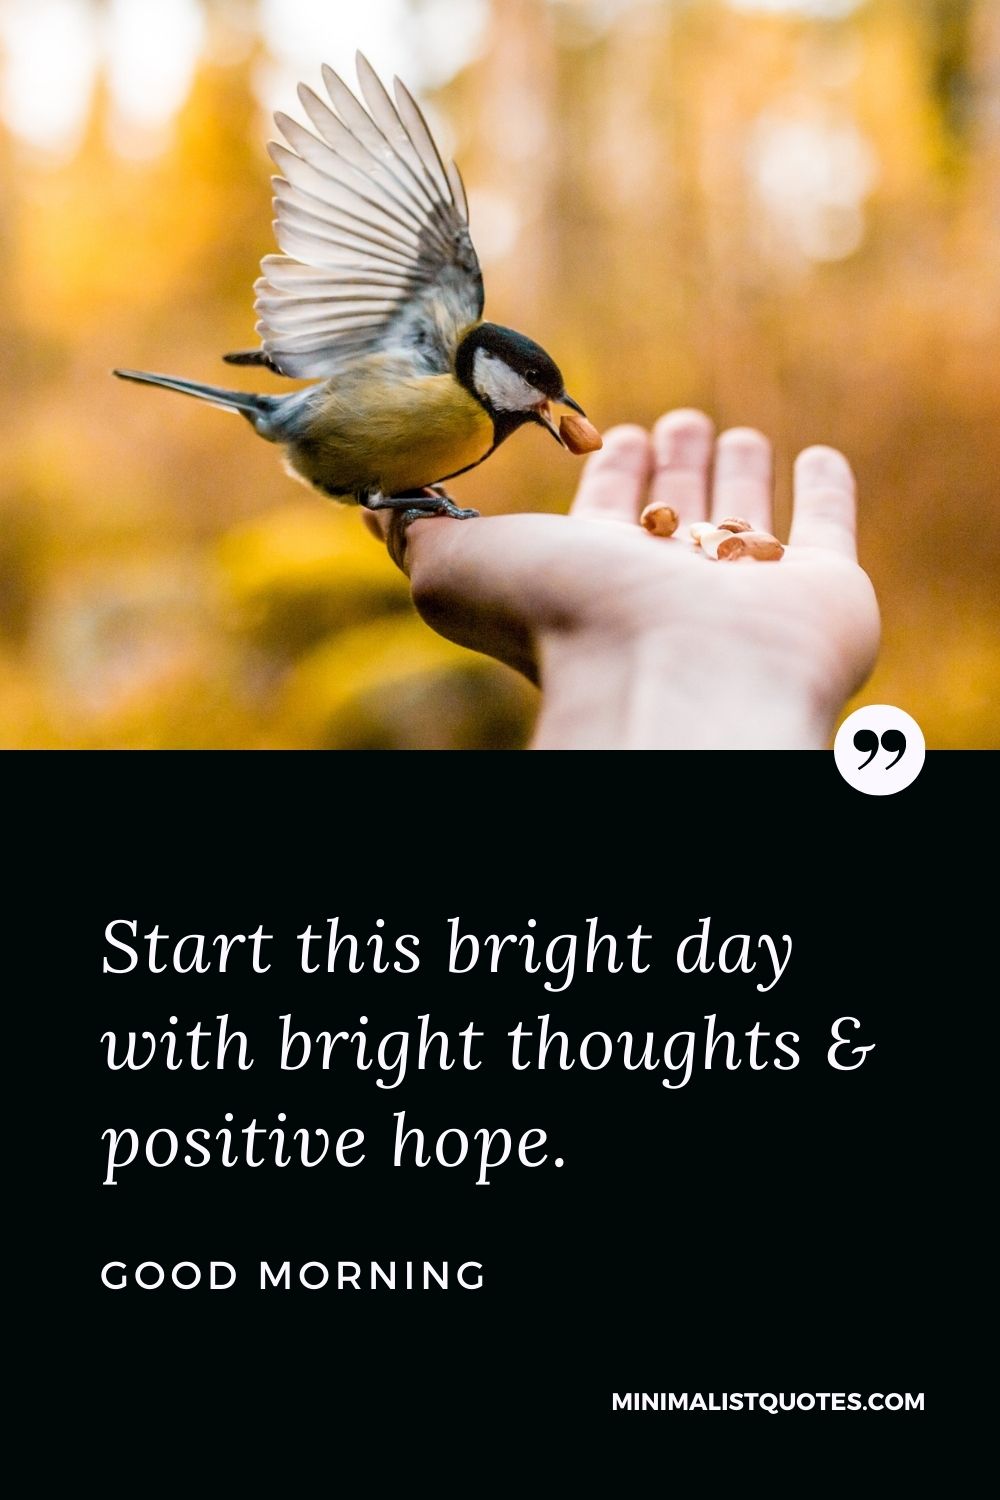 Good Morning Wish & Message With Image: Start this bright day with bright thoughts & positive hope.